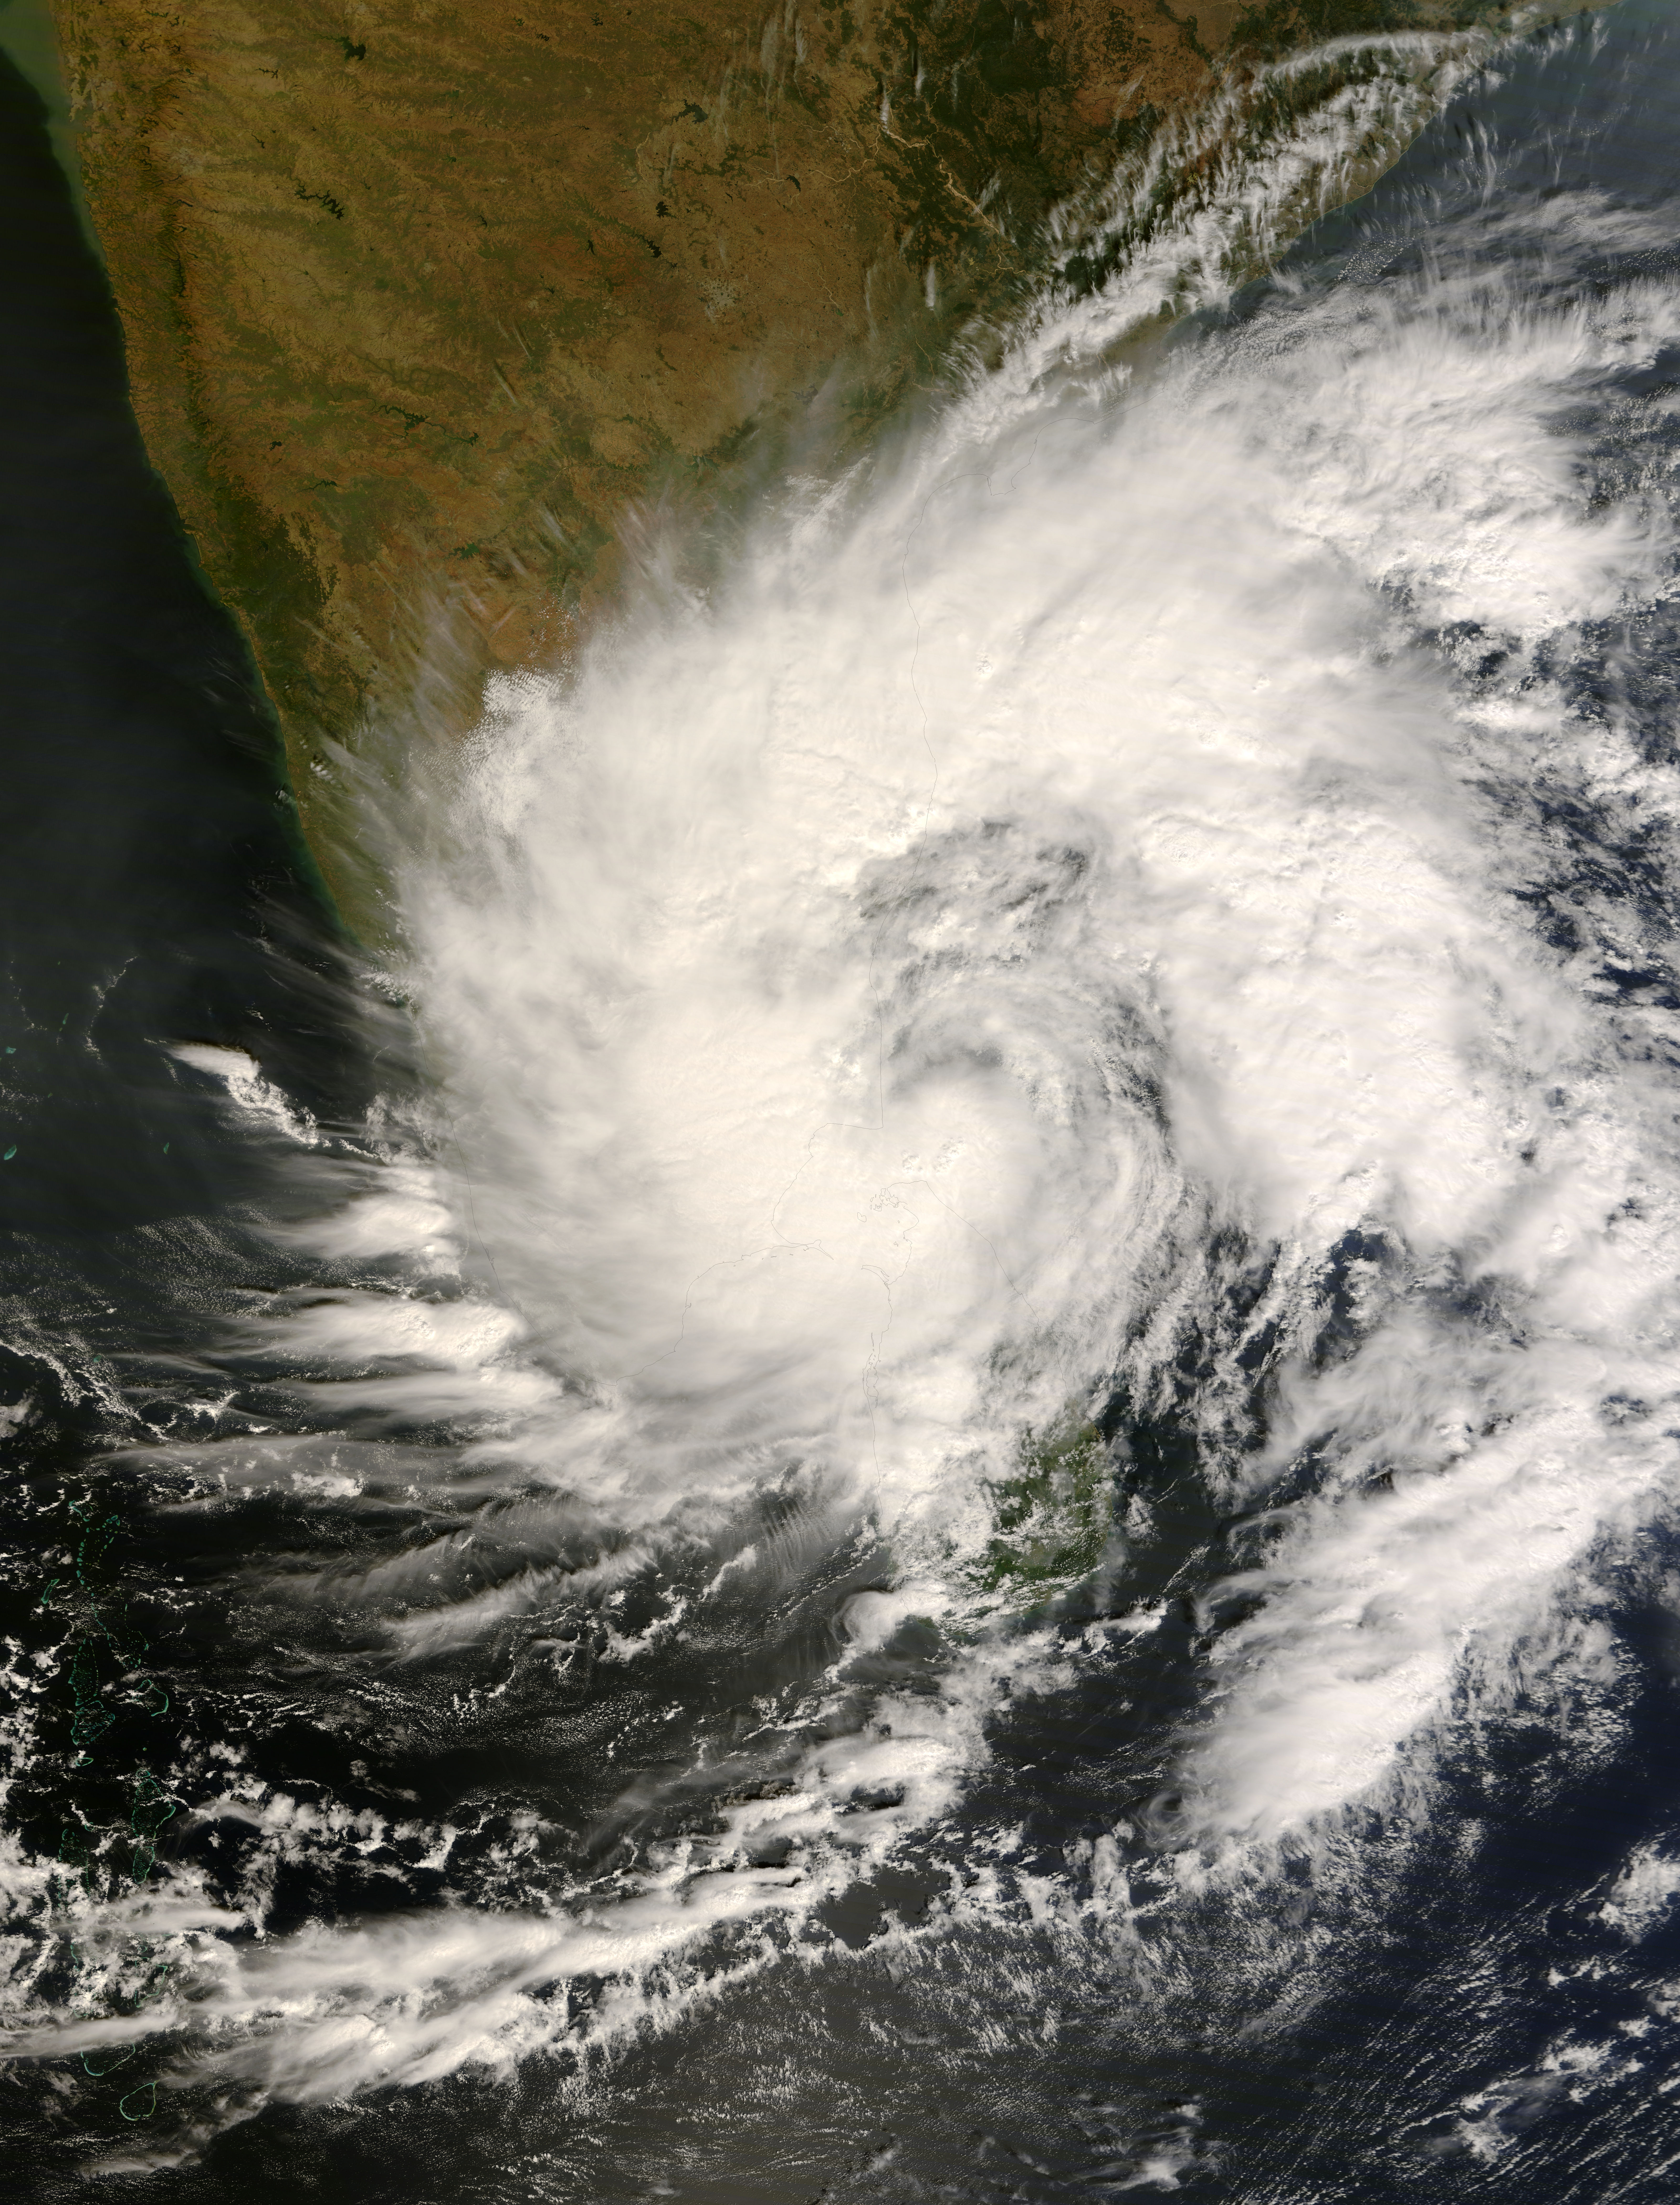 Cyclone Nisha strikes northern Sri Lanka, killing 15 people and displacing 90,000 others while dealing the region the highest rainfall in nine decades.